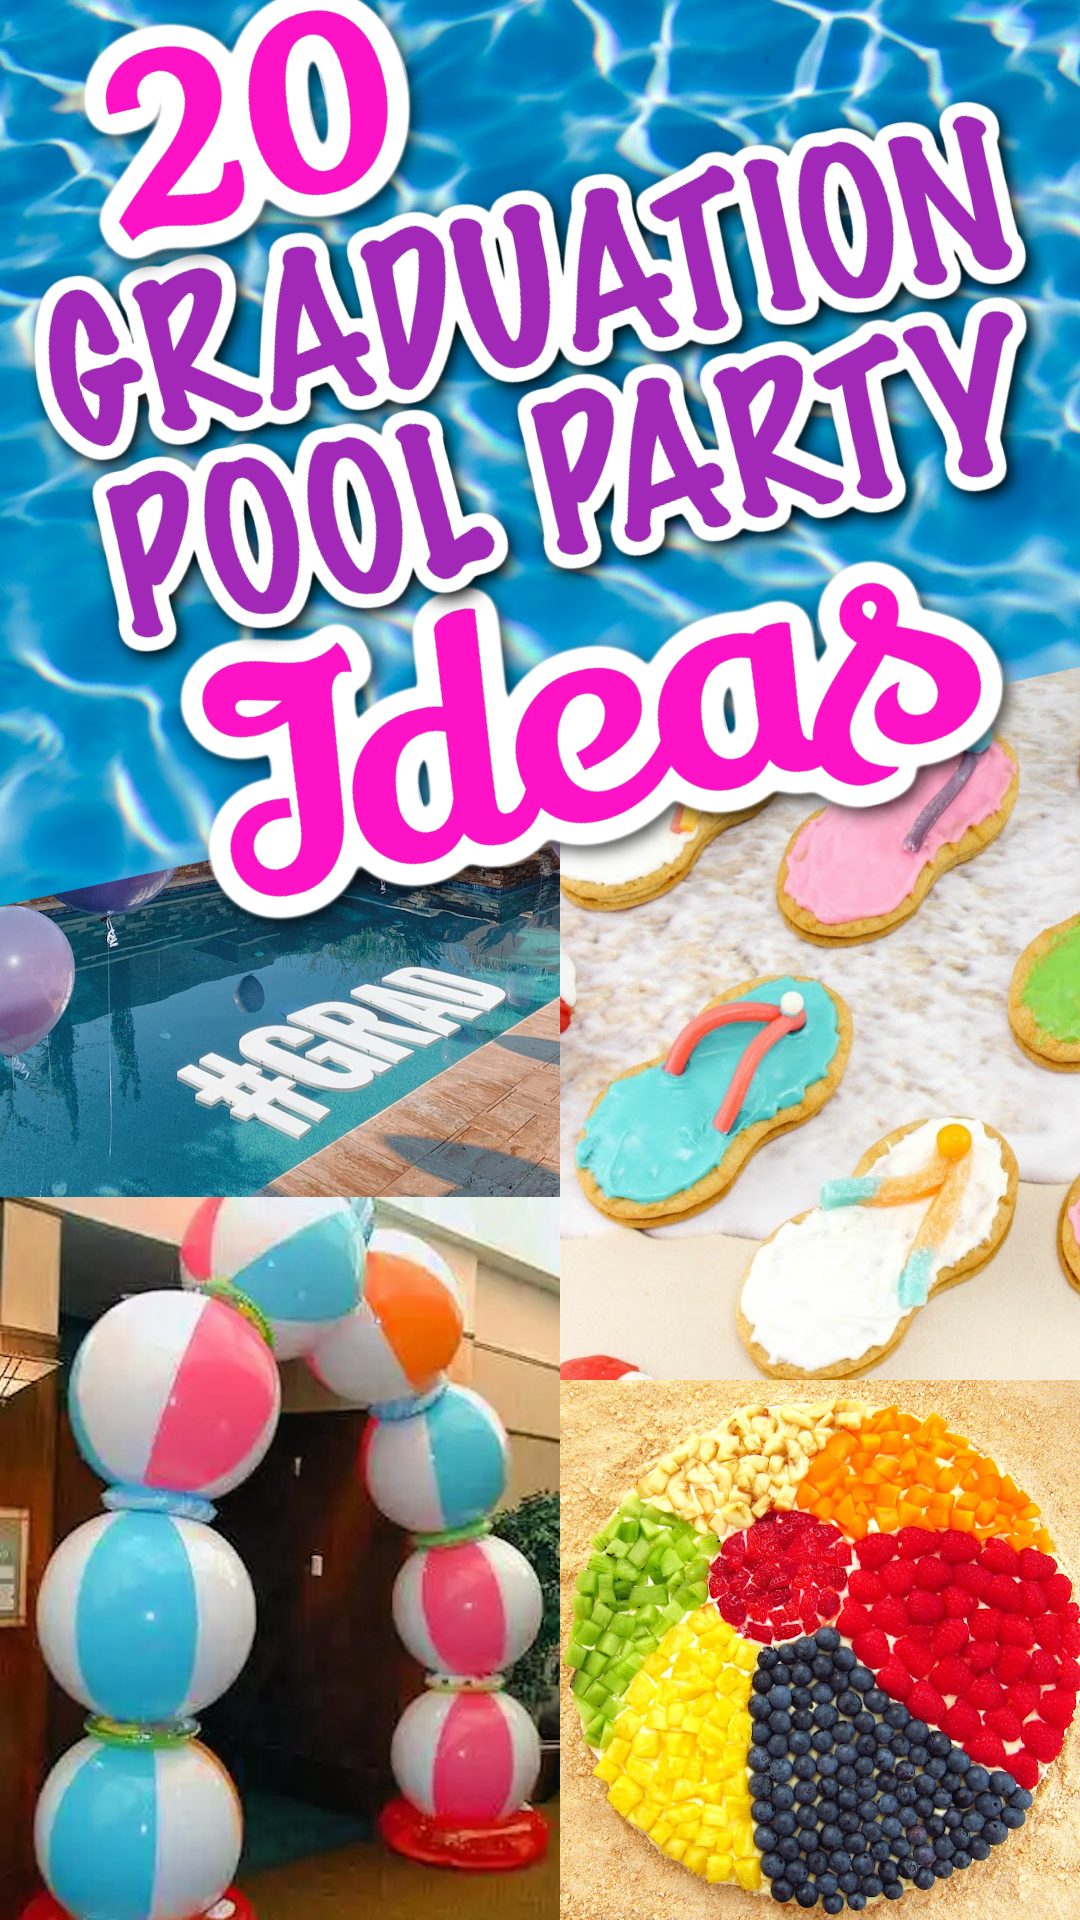 a collage of graduation pool Party ideas including beachball themed foods and party decor.